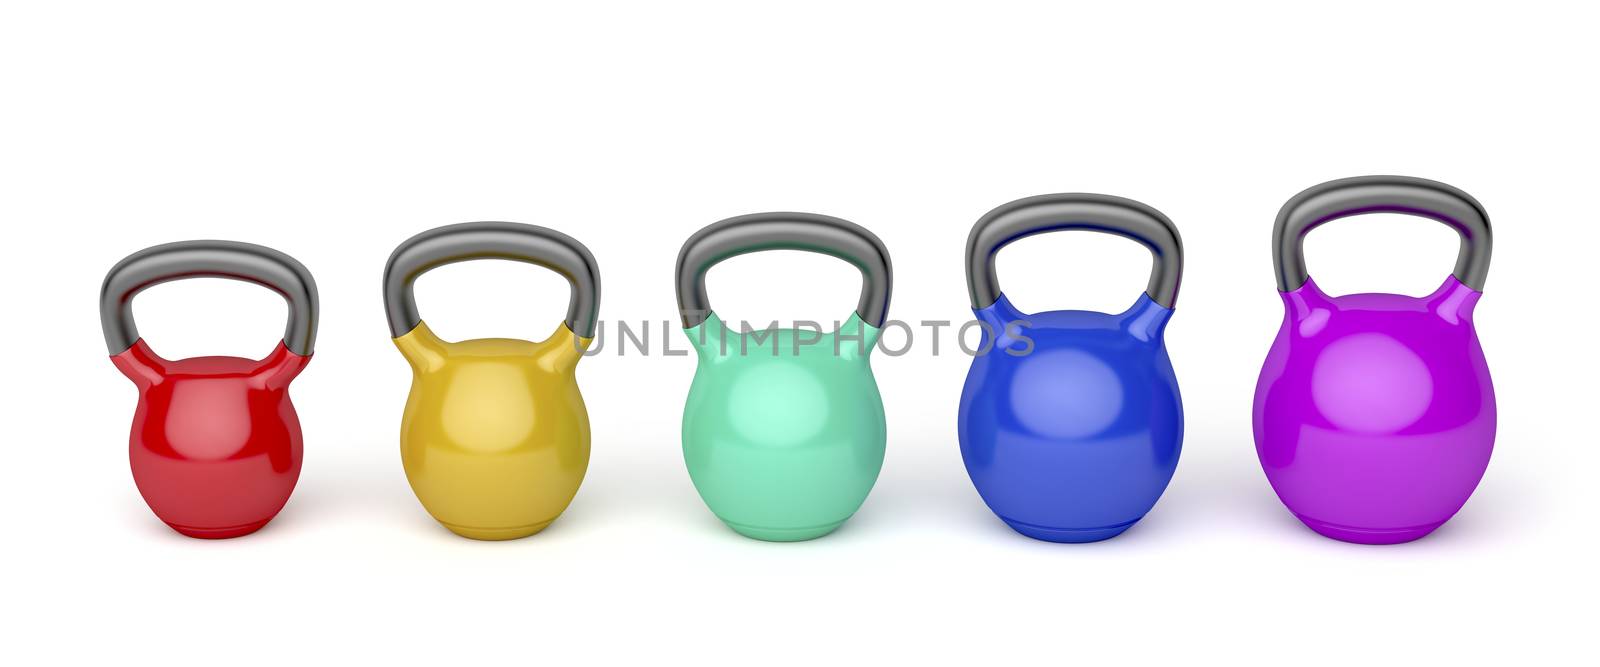 Front view of kettlebells with different sizes and colors on white background